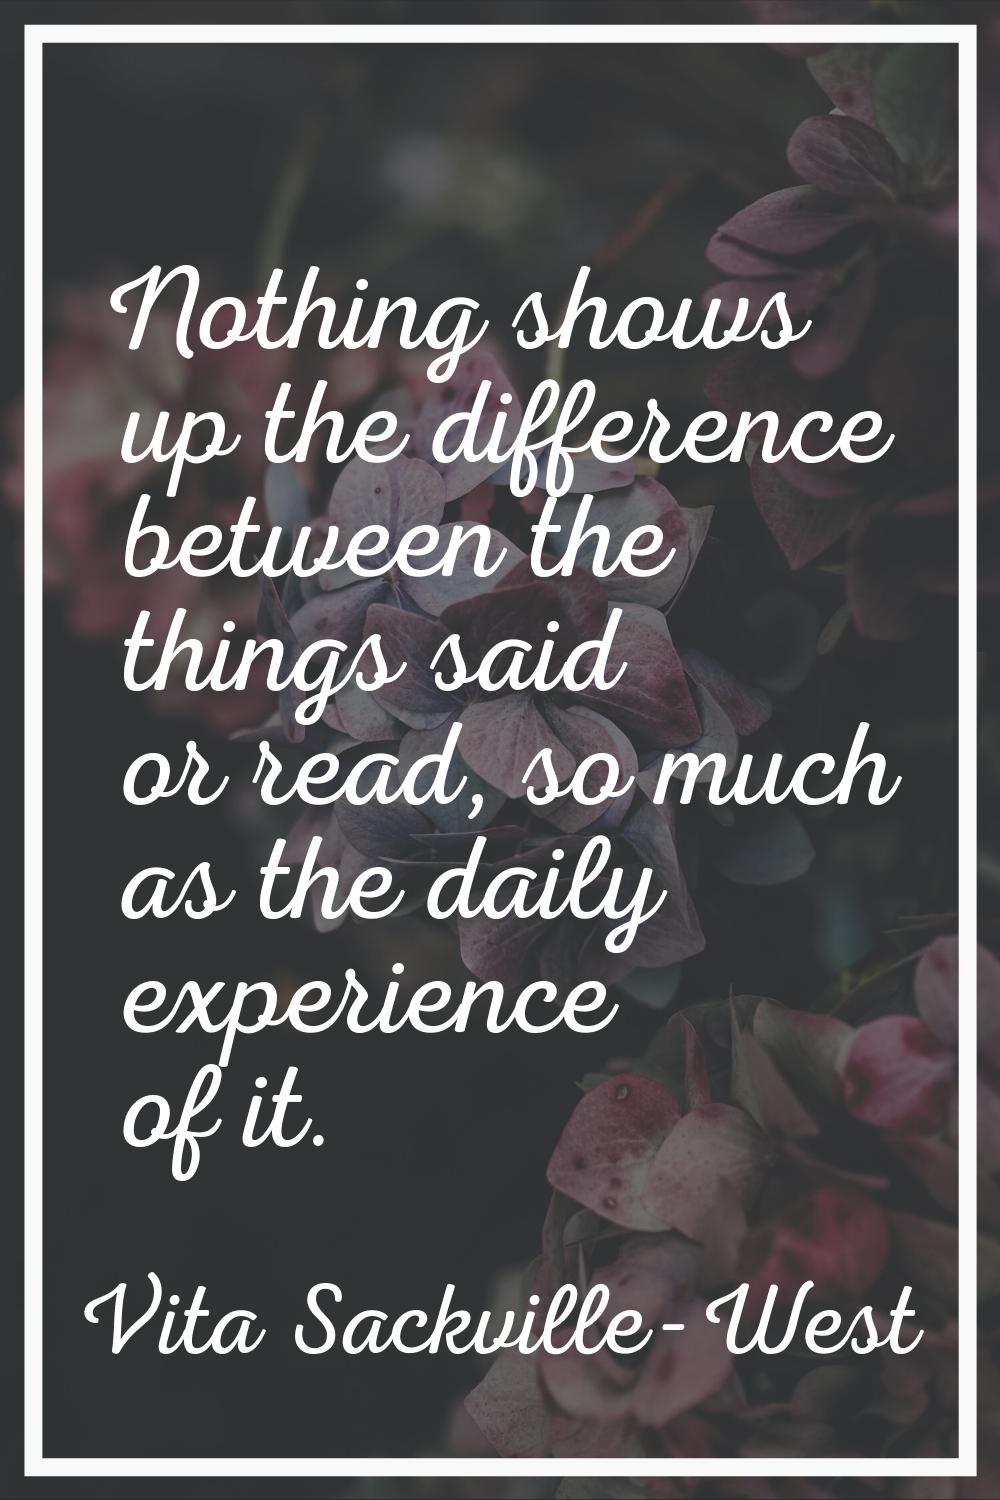 Nothing shows up the difference between the things said or read, so much as the daily experience of